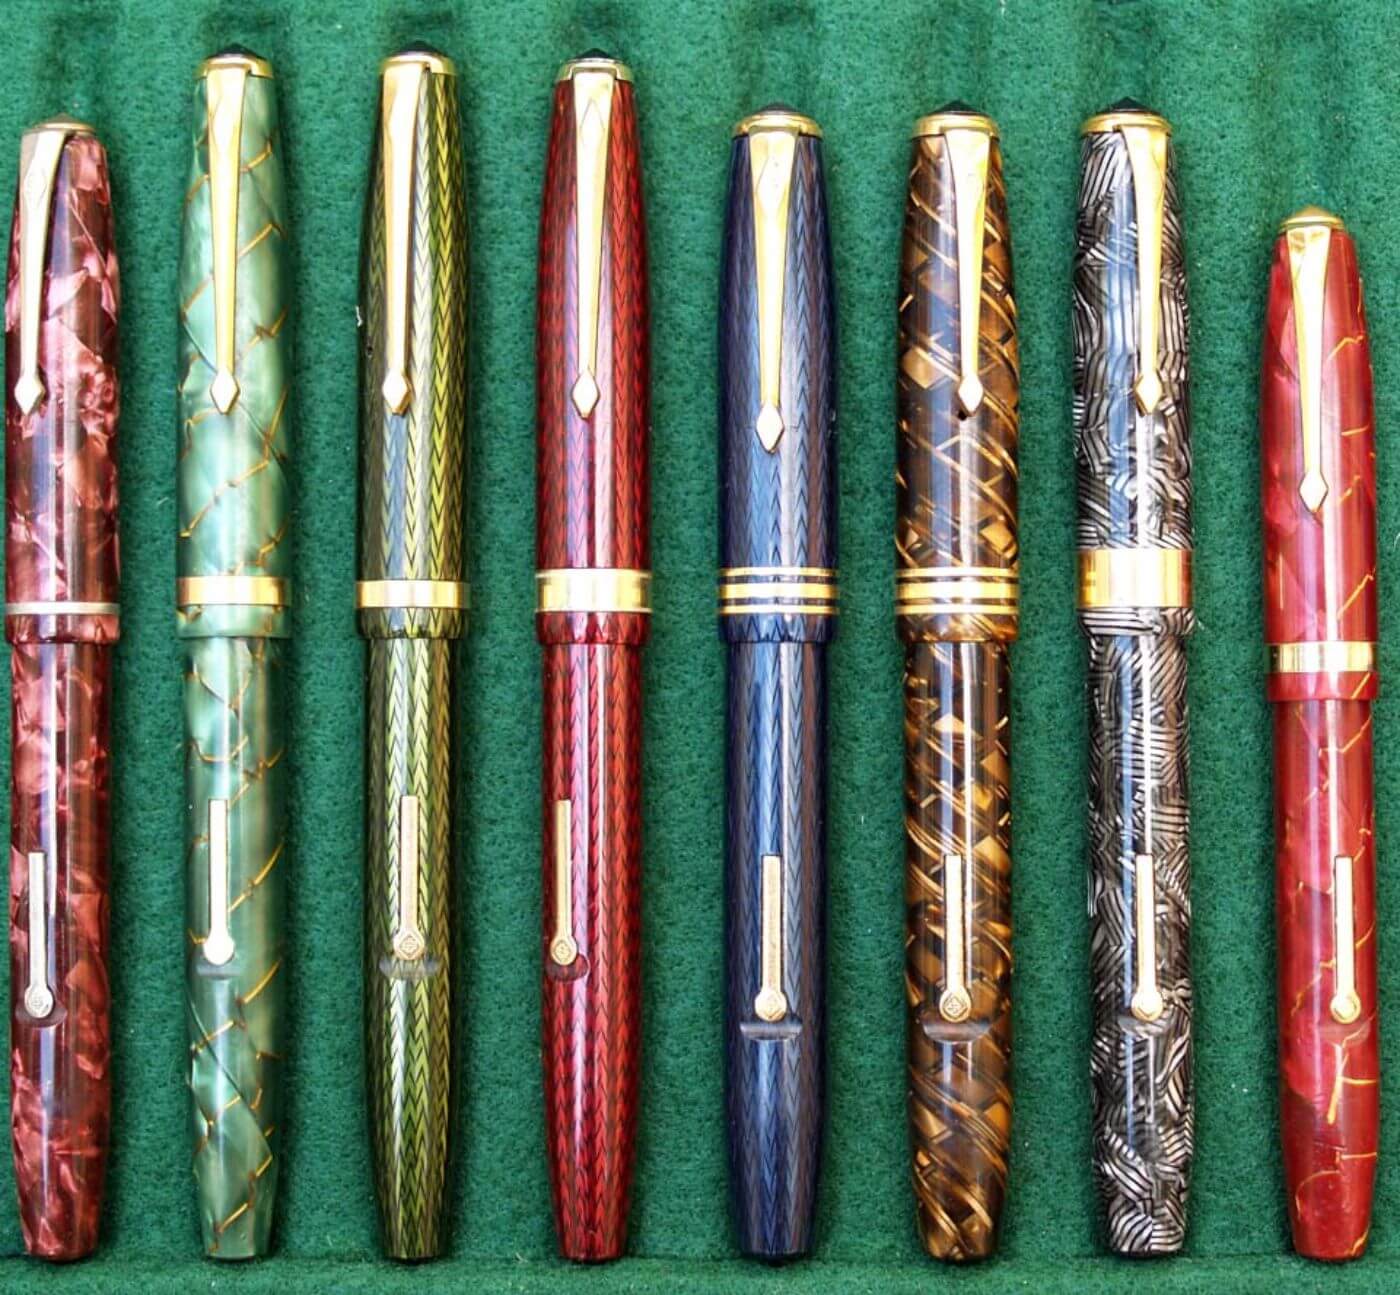 Pin on Pens and Writing Instruments, Collectible